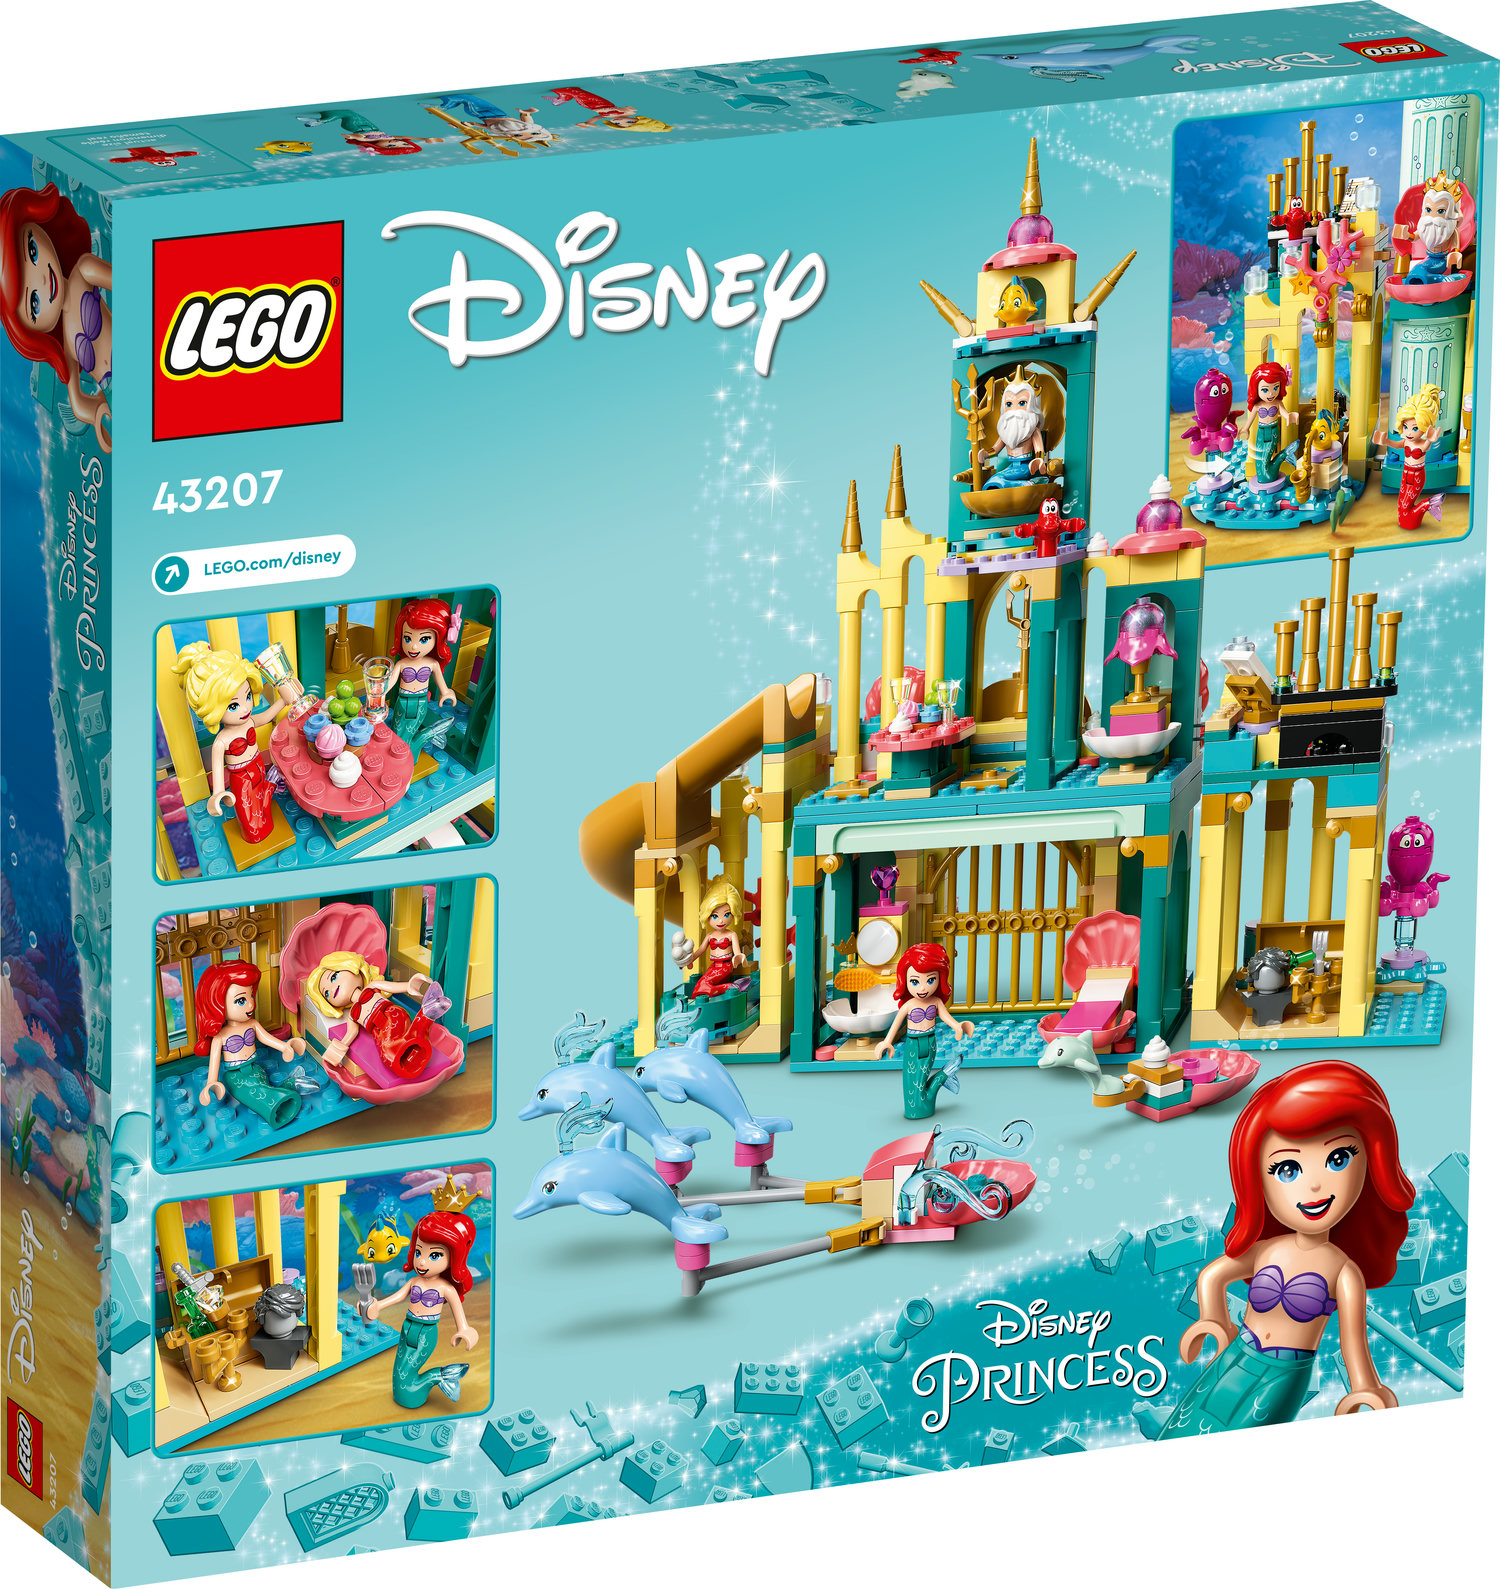 LEGO Disney Princess Ariel’s Underwater Palace 43207, Buildable Princess Castle Toy, Disney Gift Idea for Kids, Girls and Boys Aged 6+ with The Little Mermaid Mini-Doll Figure & Dolphin Figures - image 3 of 10